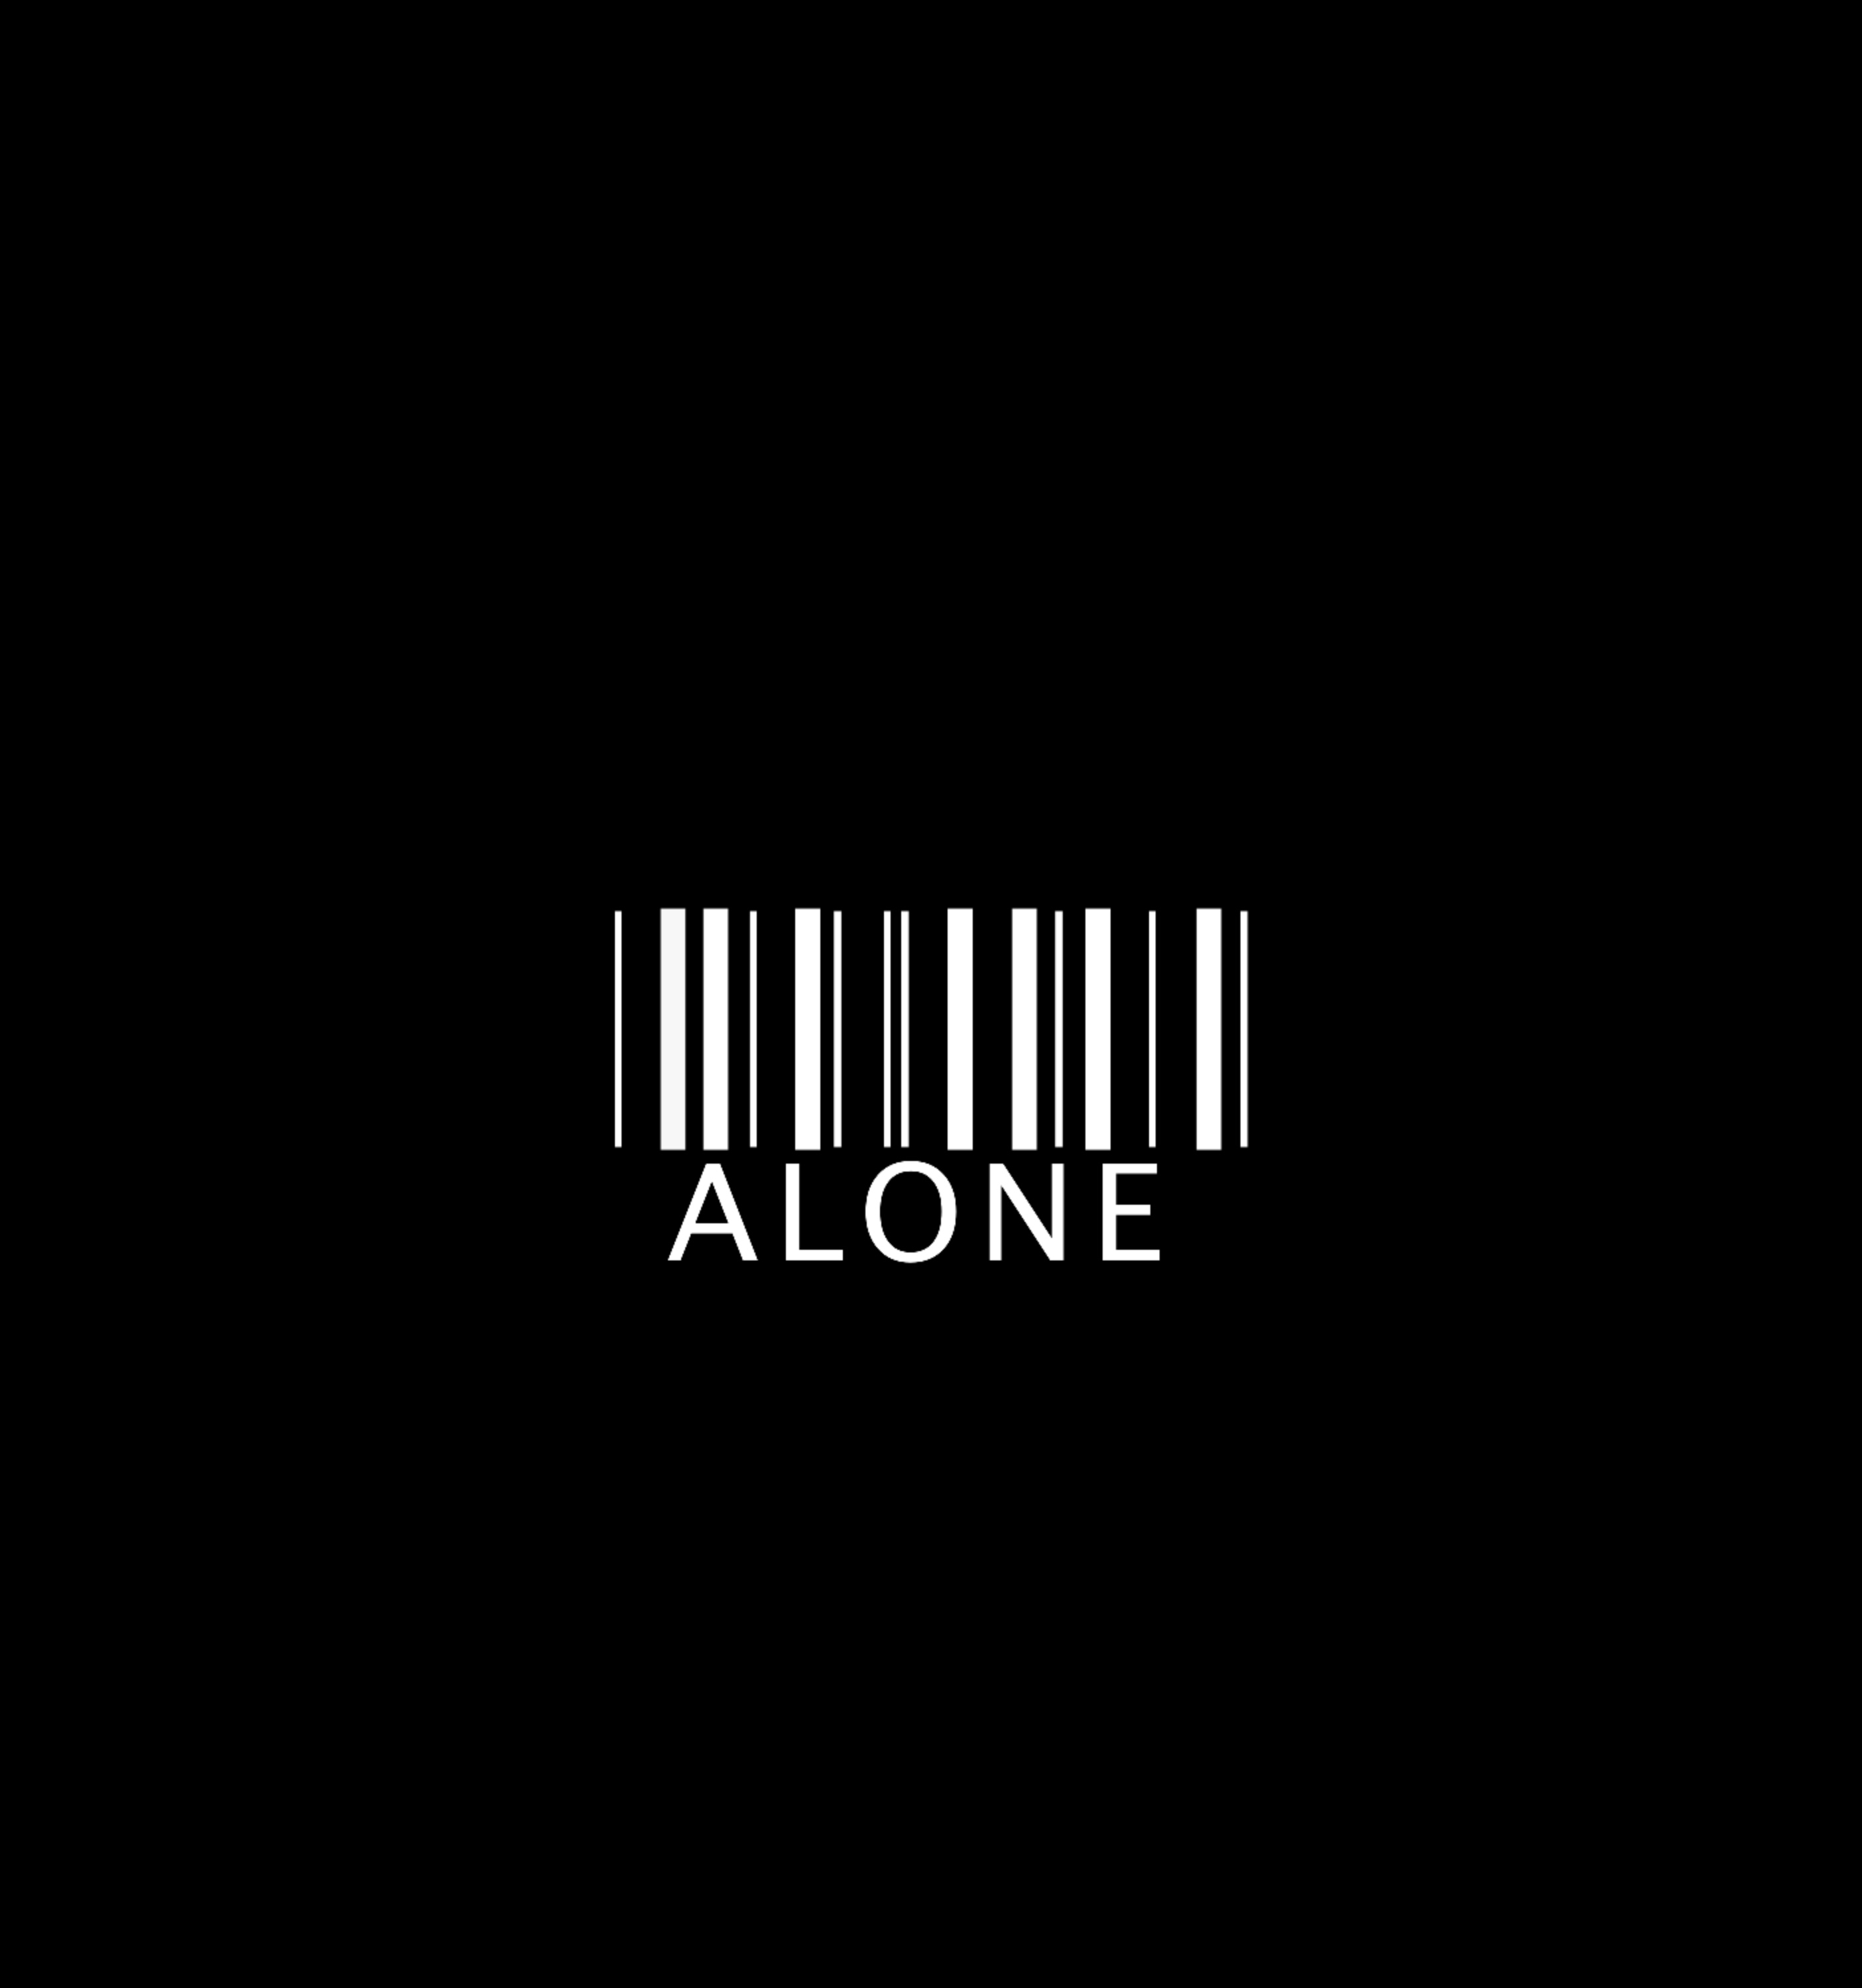 barcode, words, life, inscription, loneliness